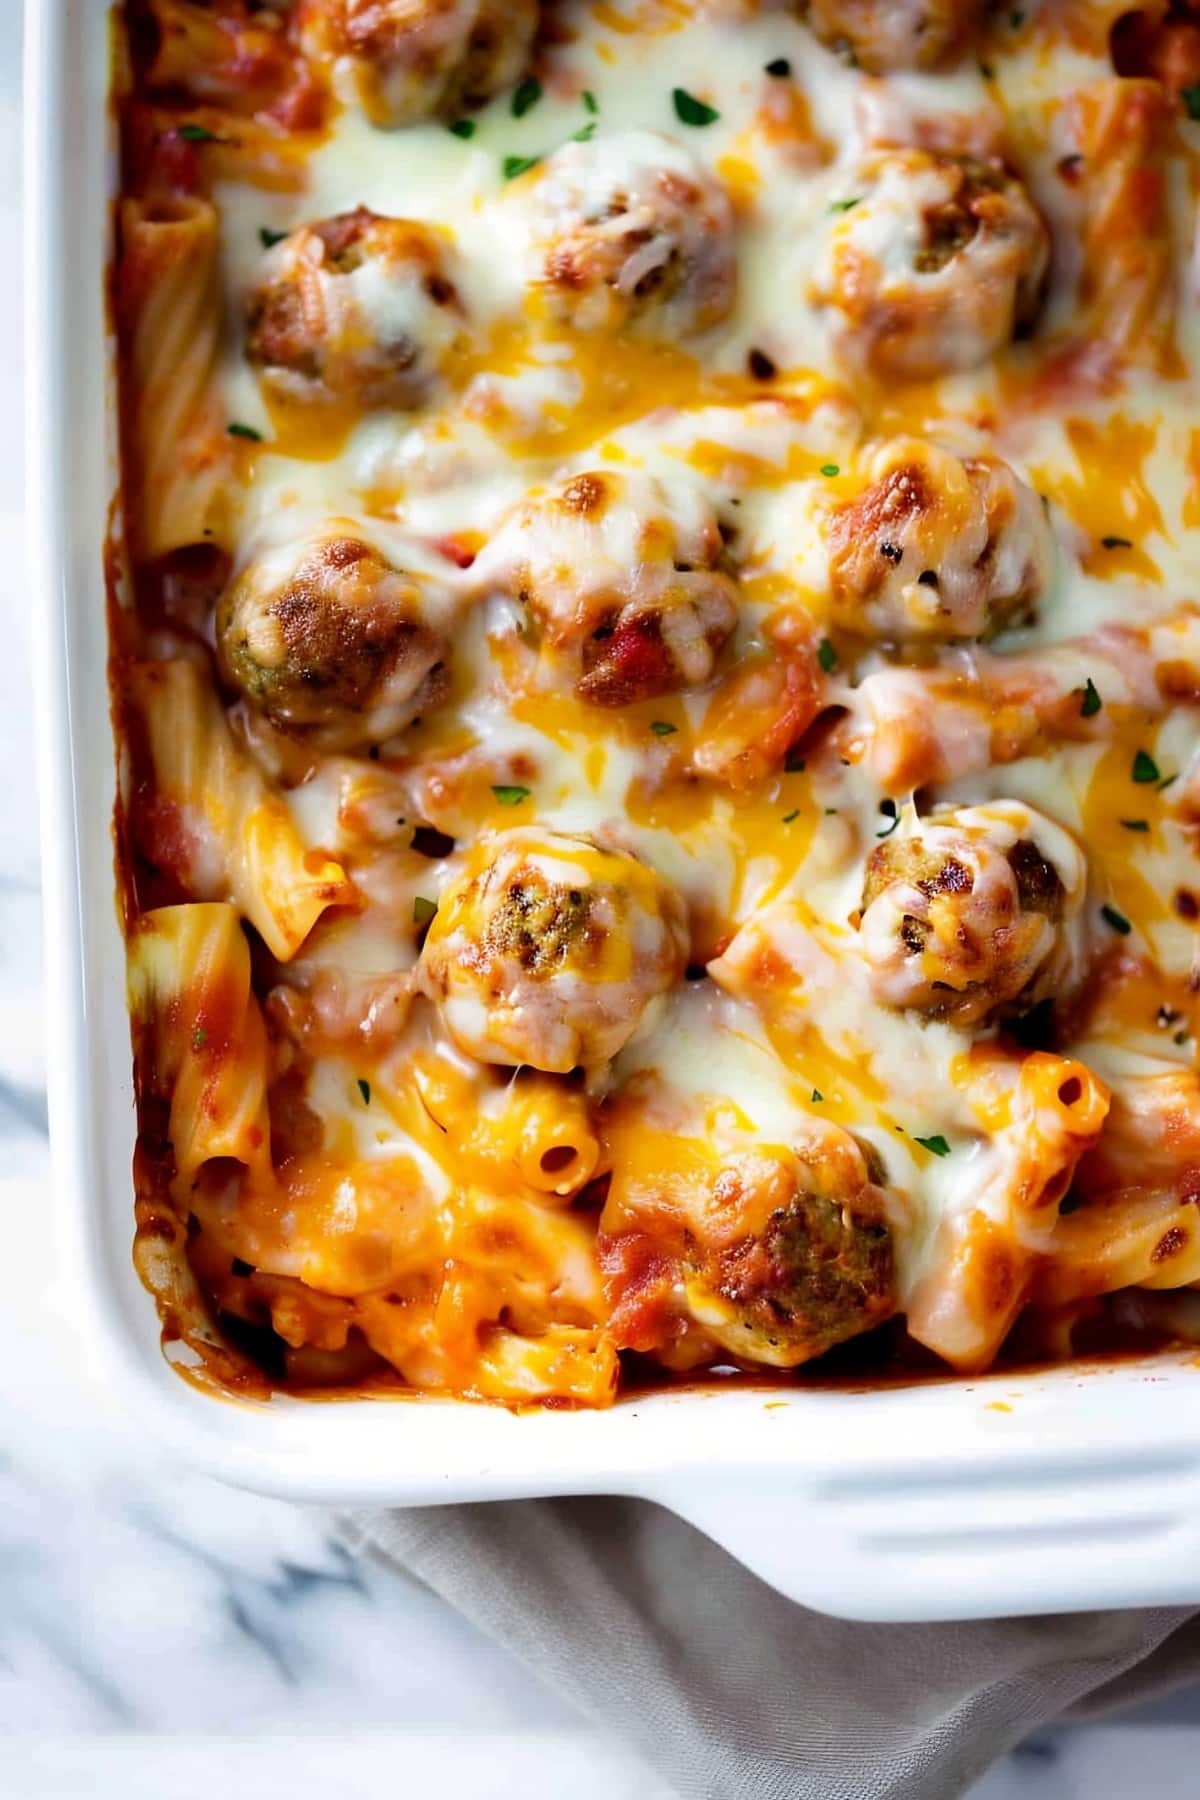 Flavorful homemade meatball casserole featuring baked ziti pasta, tomato sauce and melty cheese